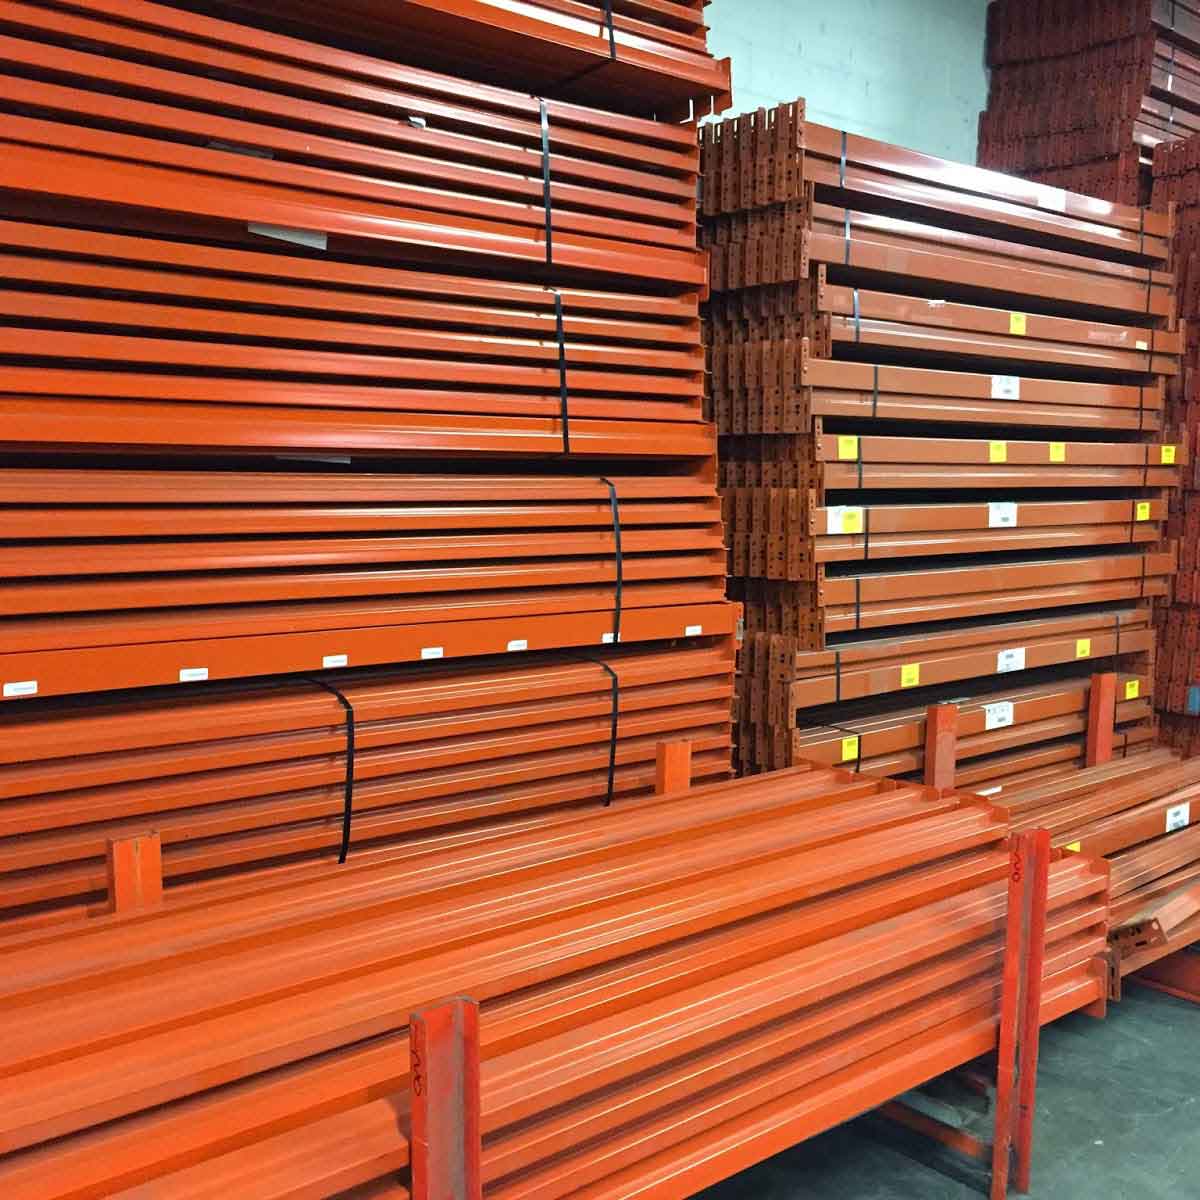 Pallet rack beams sit on top of eachother in a warehouse